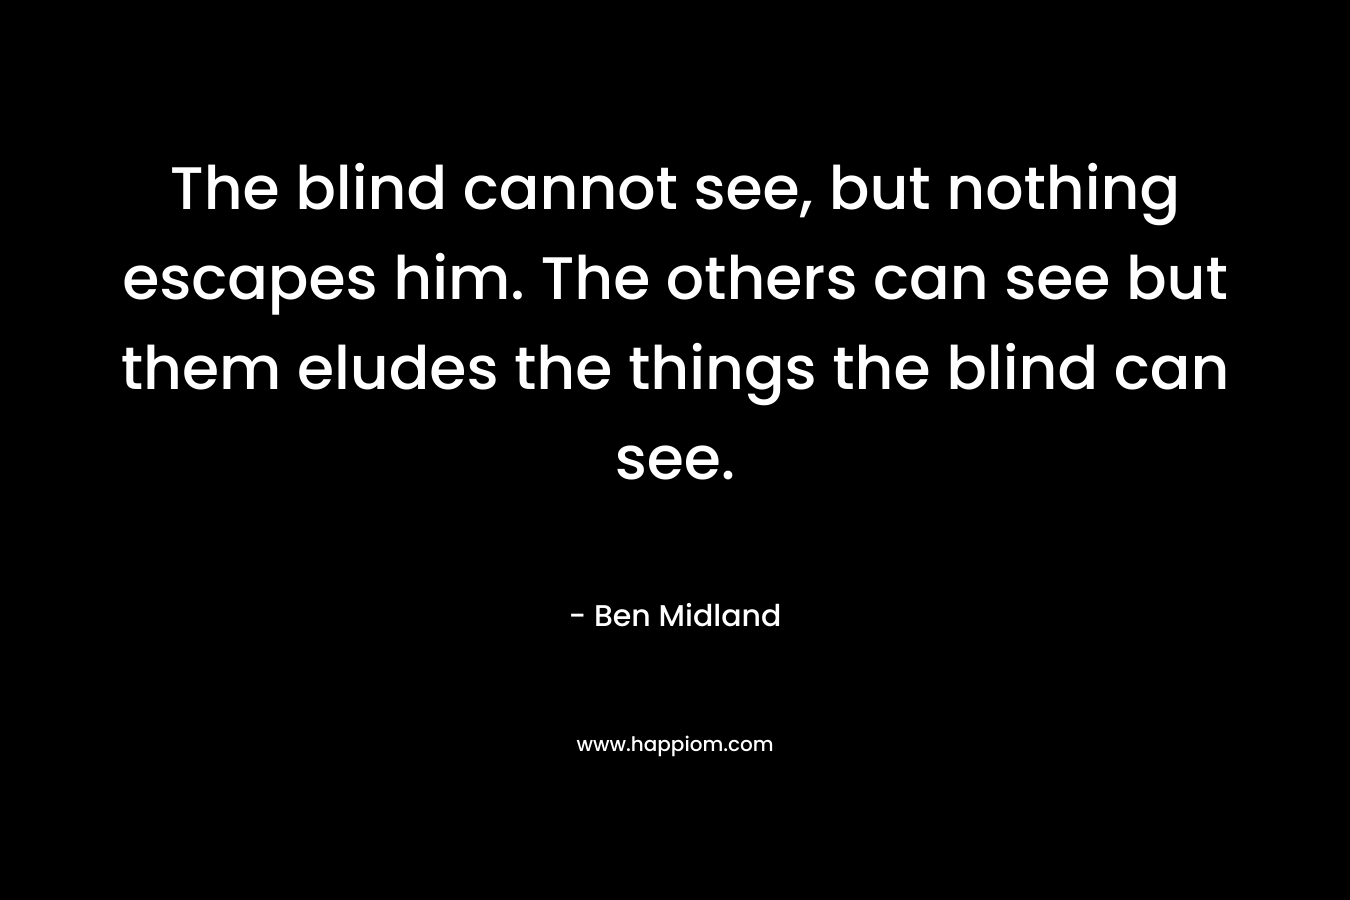 The blind cannot see, but nothing escapes him. The others can see but them eludes the things the blind can see.